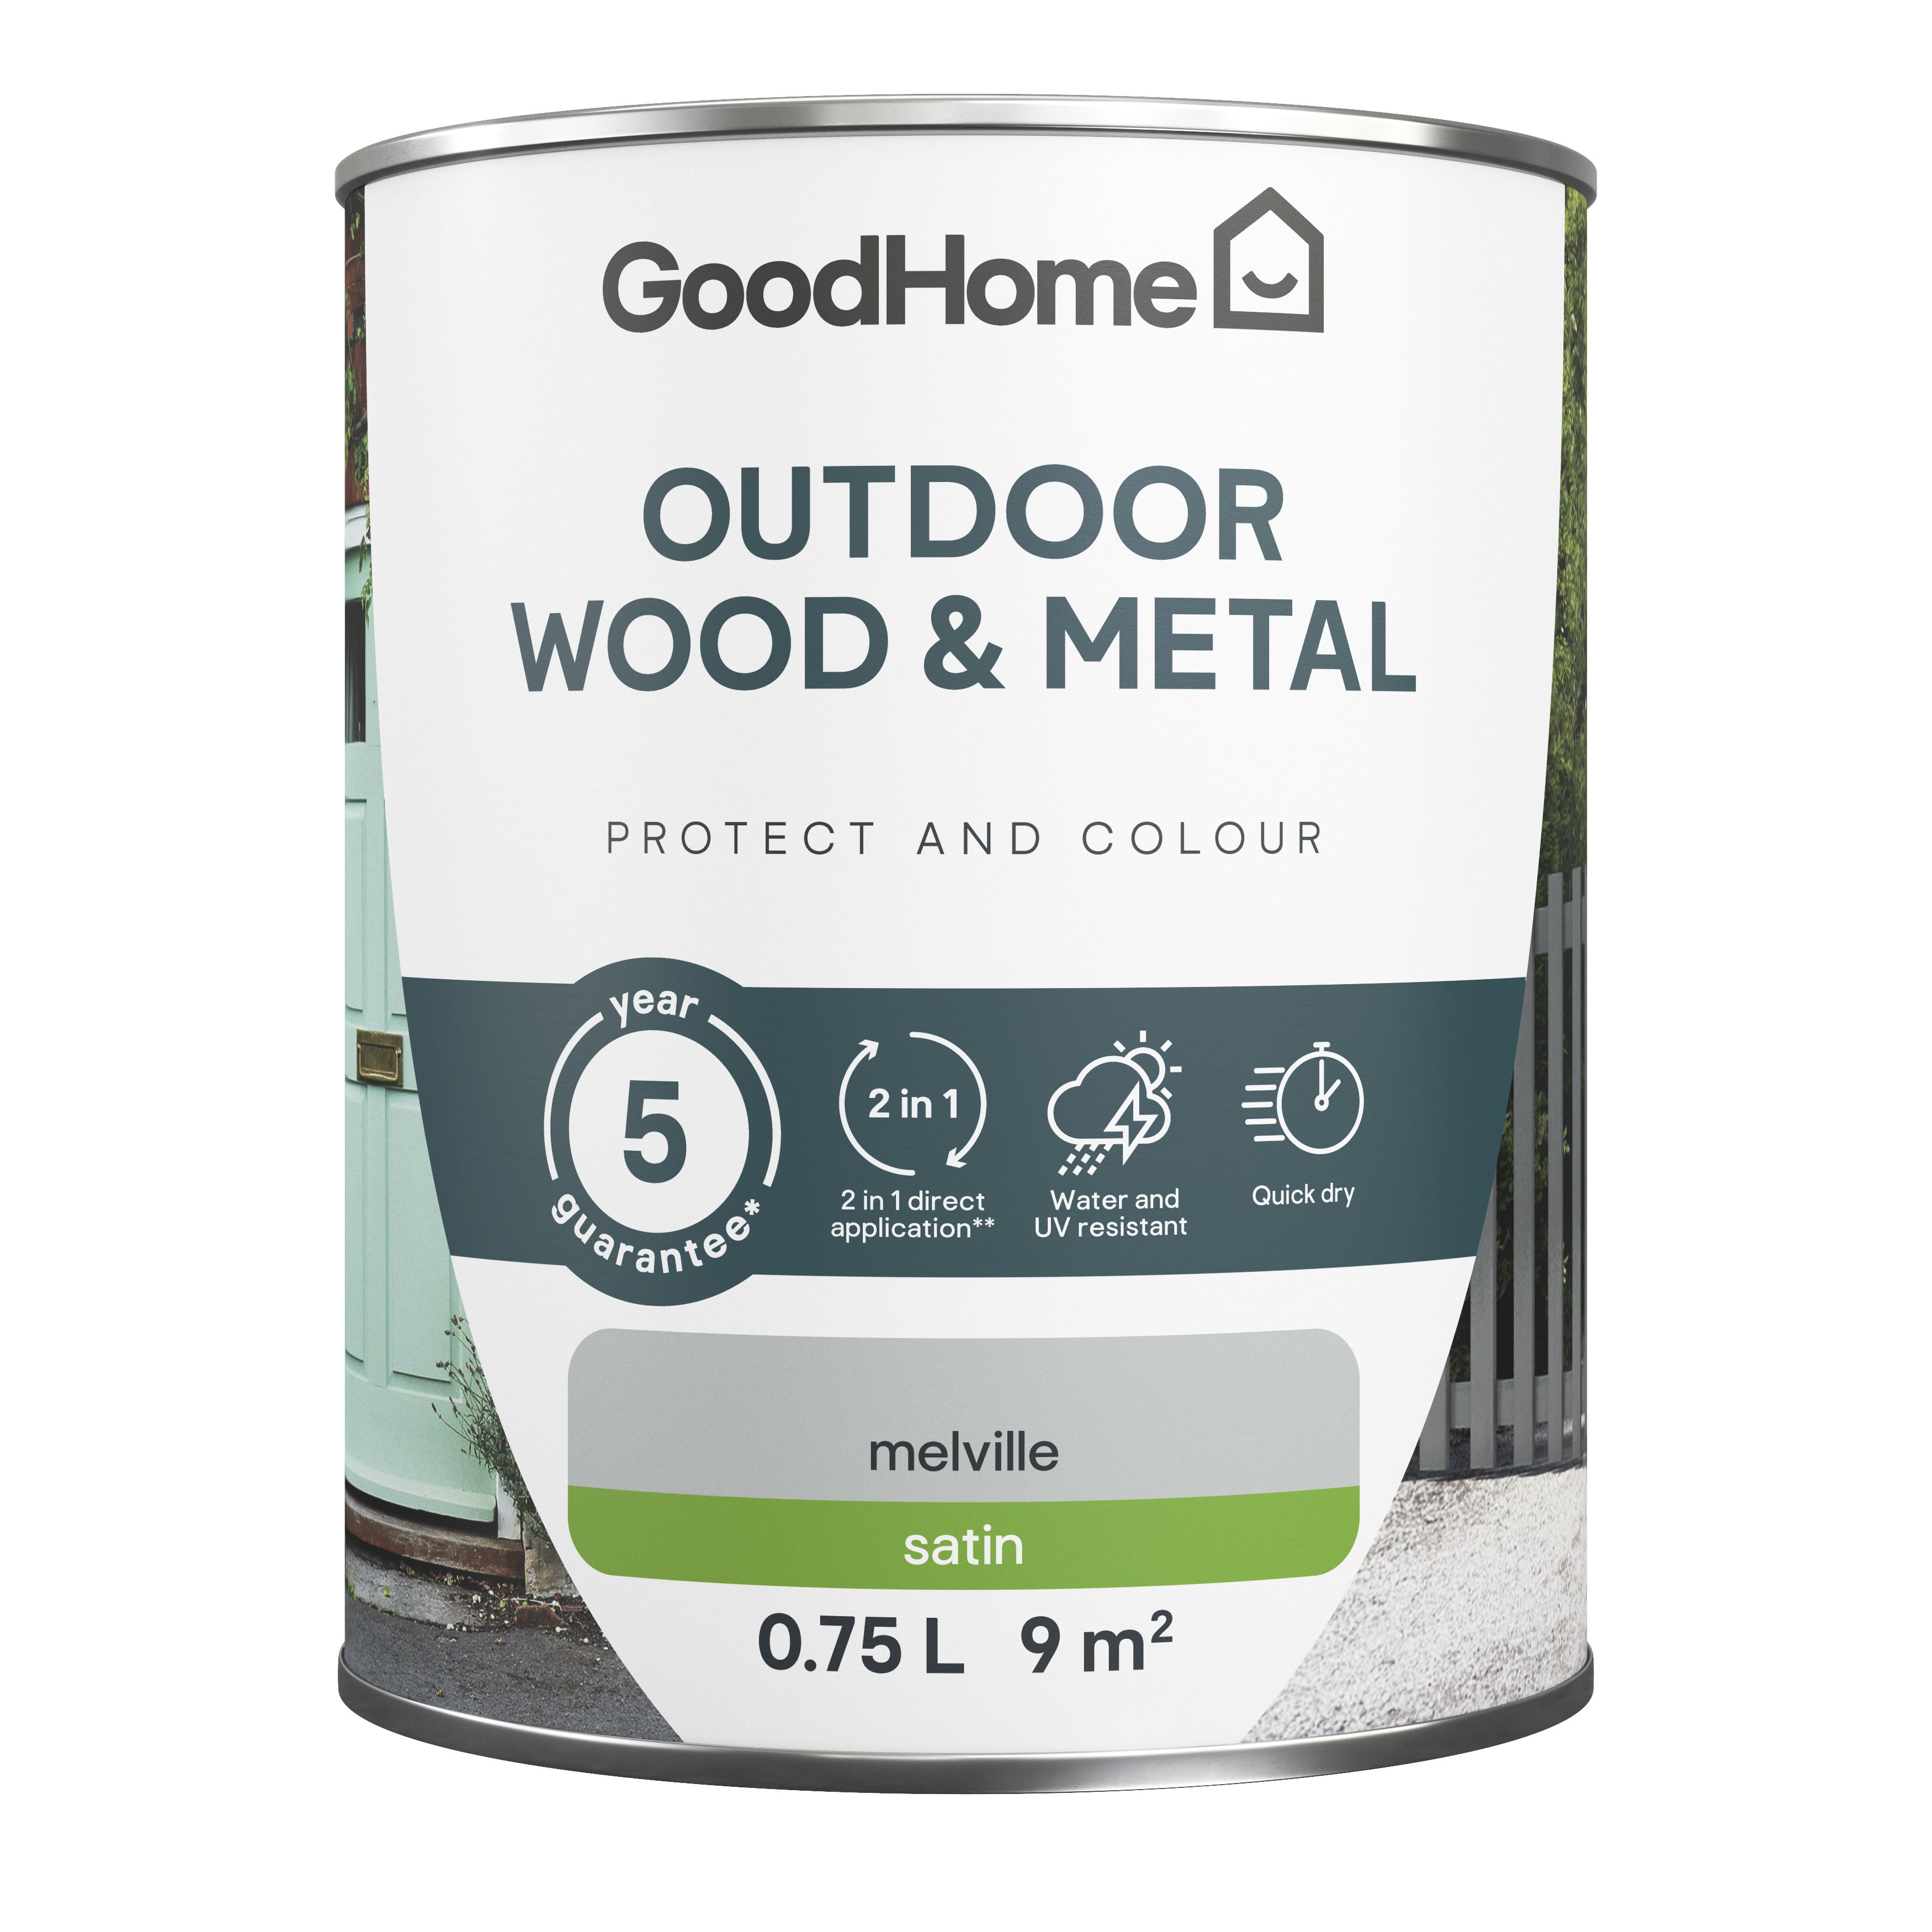 GoodHome Outdoor Melville Satinwood Multi-surface paint, 750ml